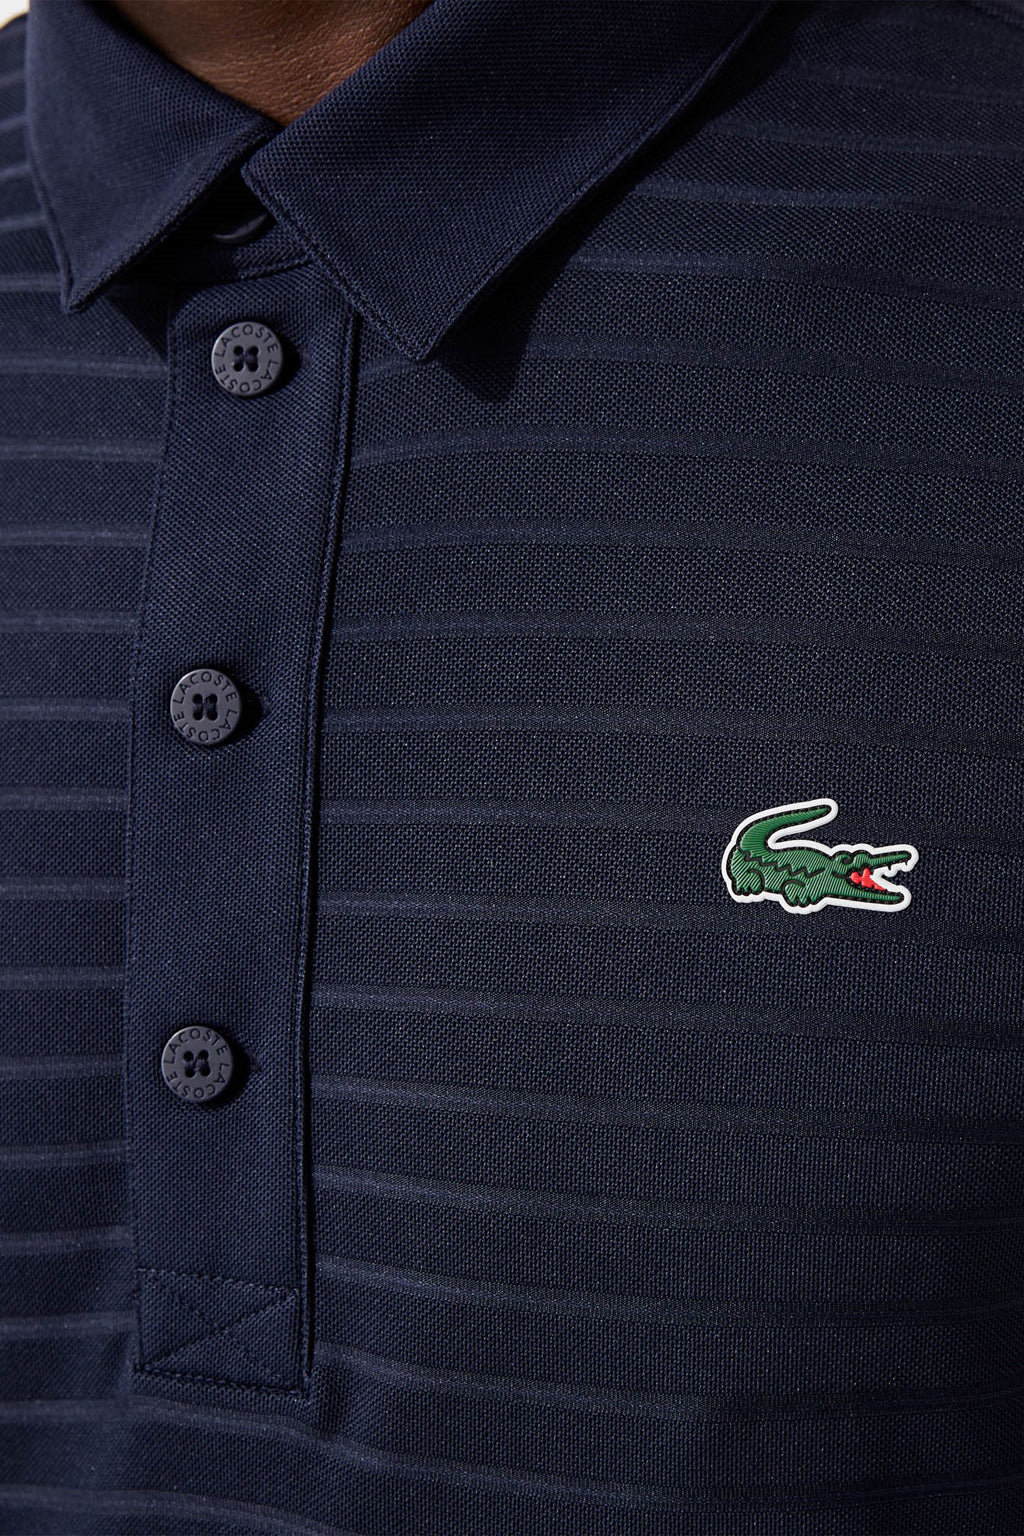 Lacoste Sport Textured Breathable Golf Polo Shirt